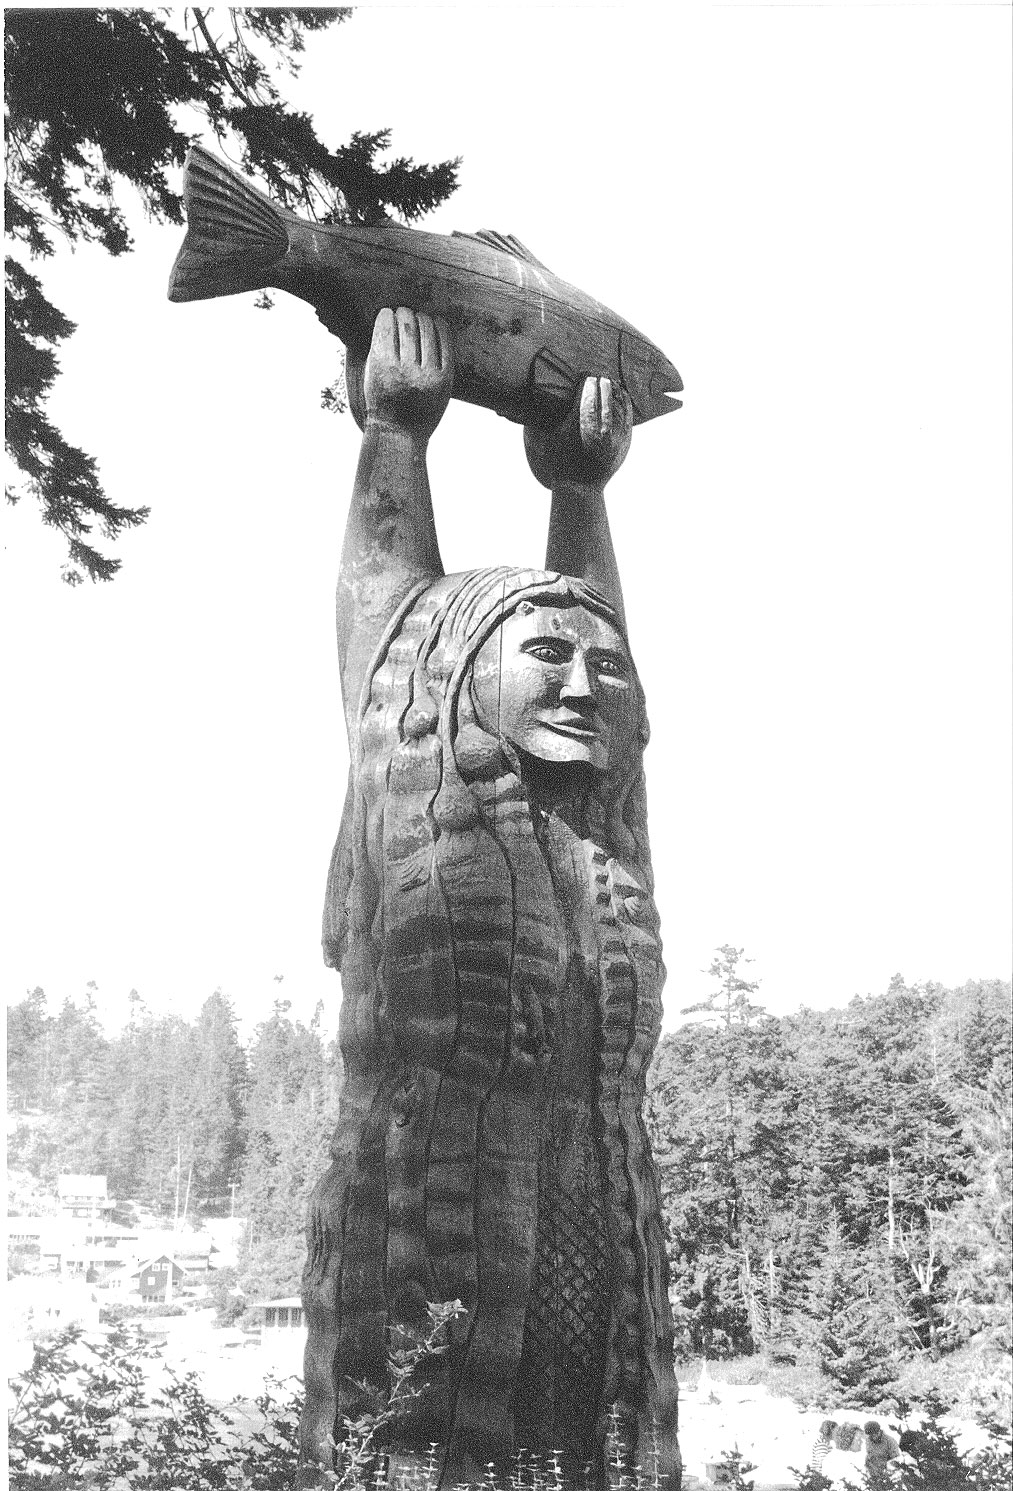 The double-sided story pole of Ko-Kwal-Alwoot, the Maiden of Deception Pass, between Bowman Bay and Sharpe Cove